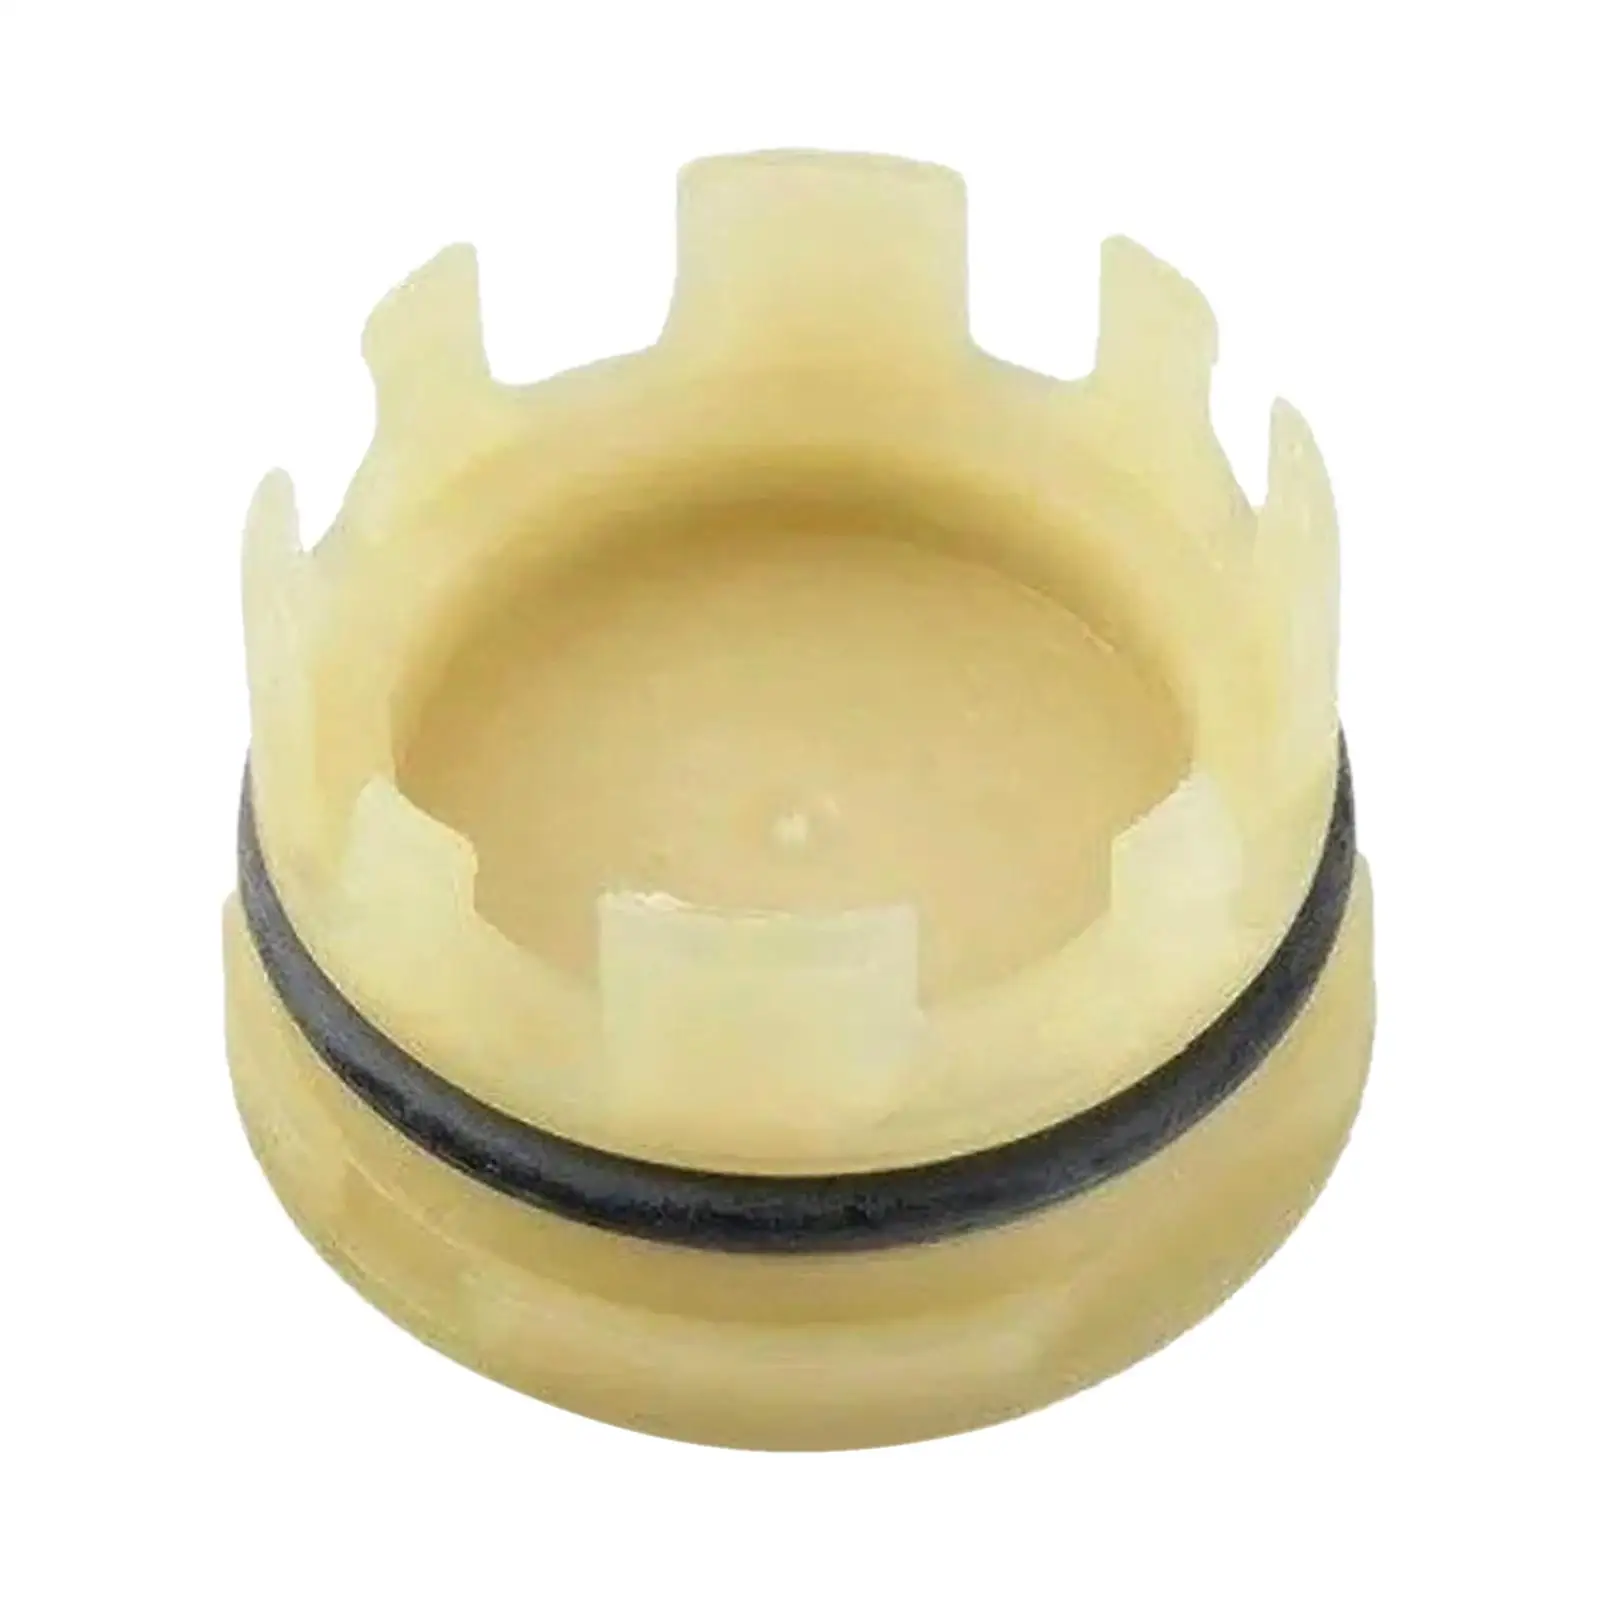 Engine End Cover with Gasket ,Cylinder Head Gasket ,11117797932 Replaces for 1 Series E87 Repair Part Easy to Install Accessory